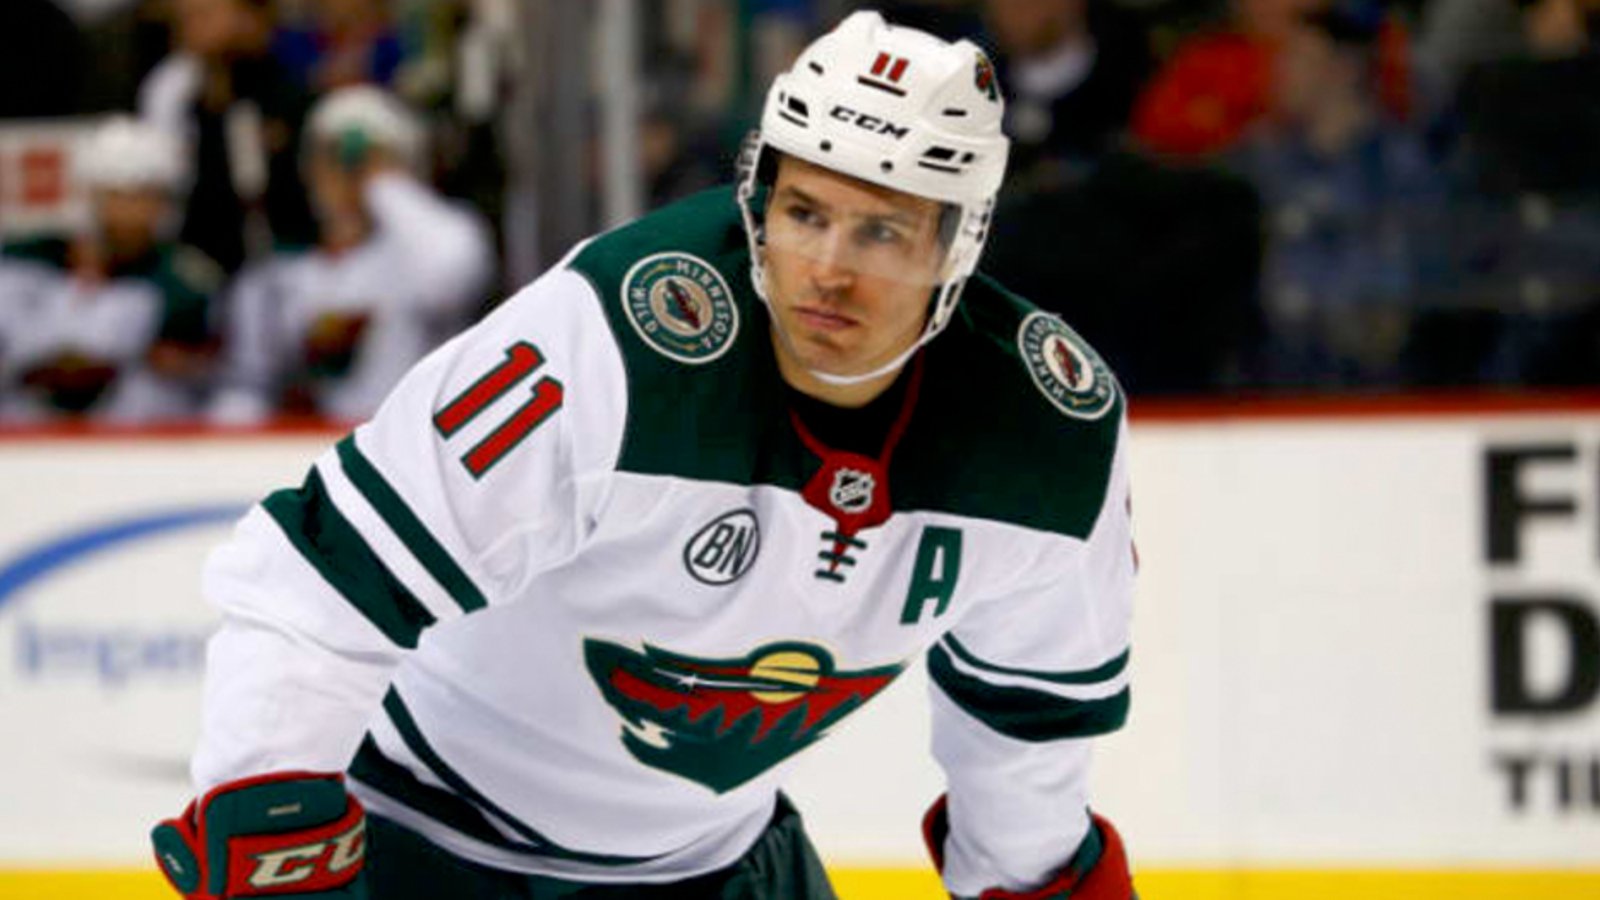 Zach Parise confirms report that he's joining forces again with Lou Lamoriello